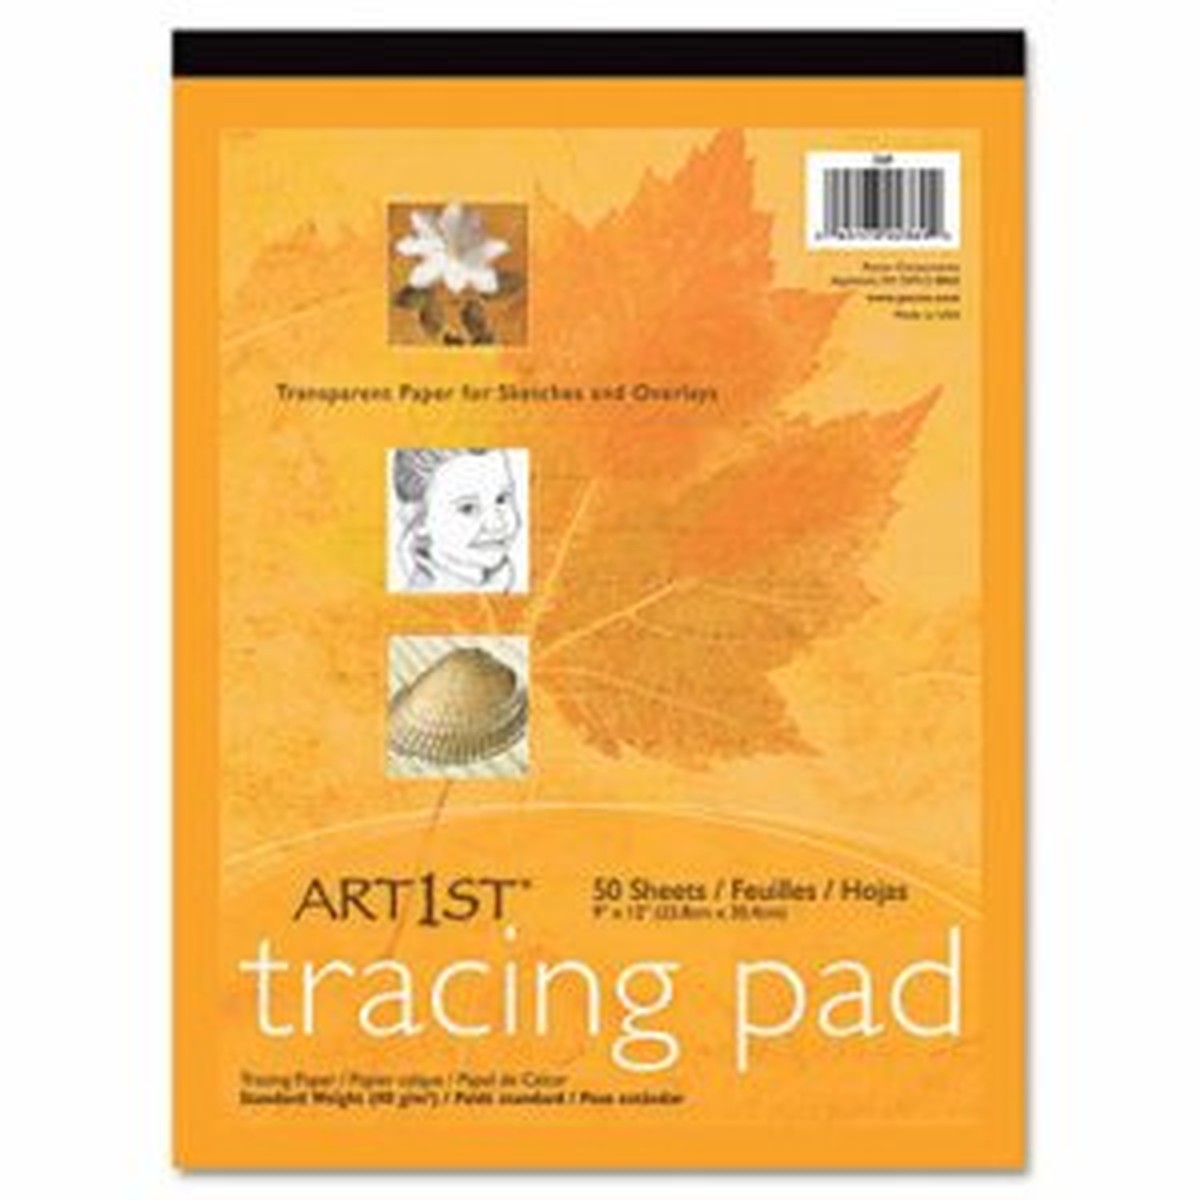 Art1st Parchment Tracing Paper, 14 x 17, White, 50 Sheets